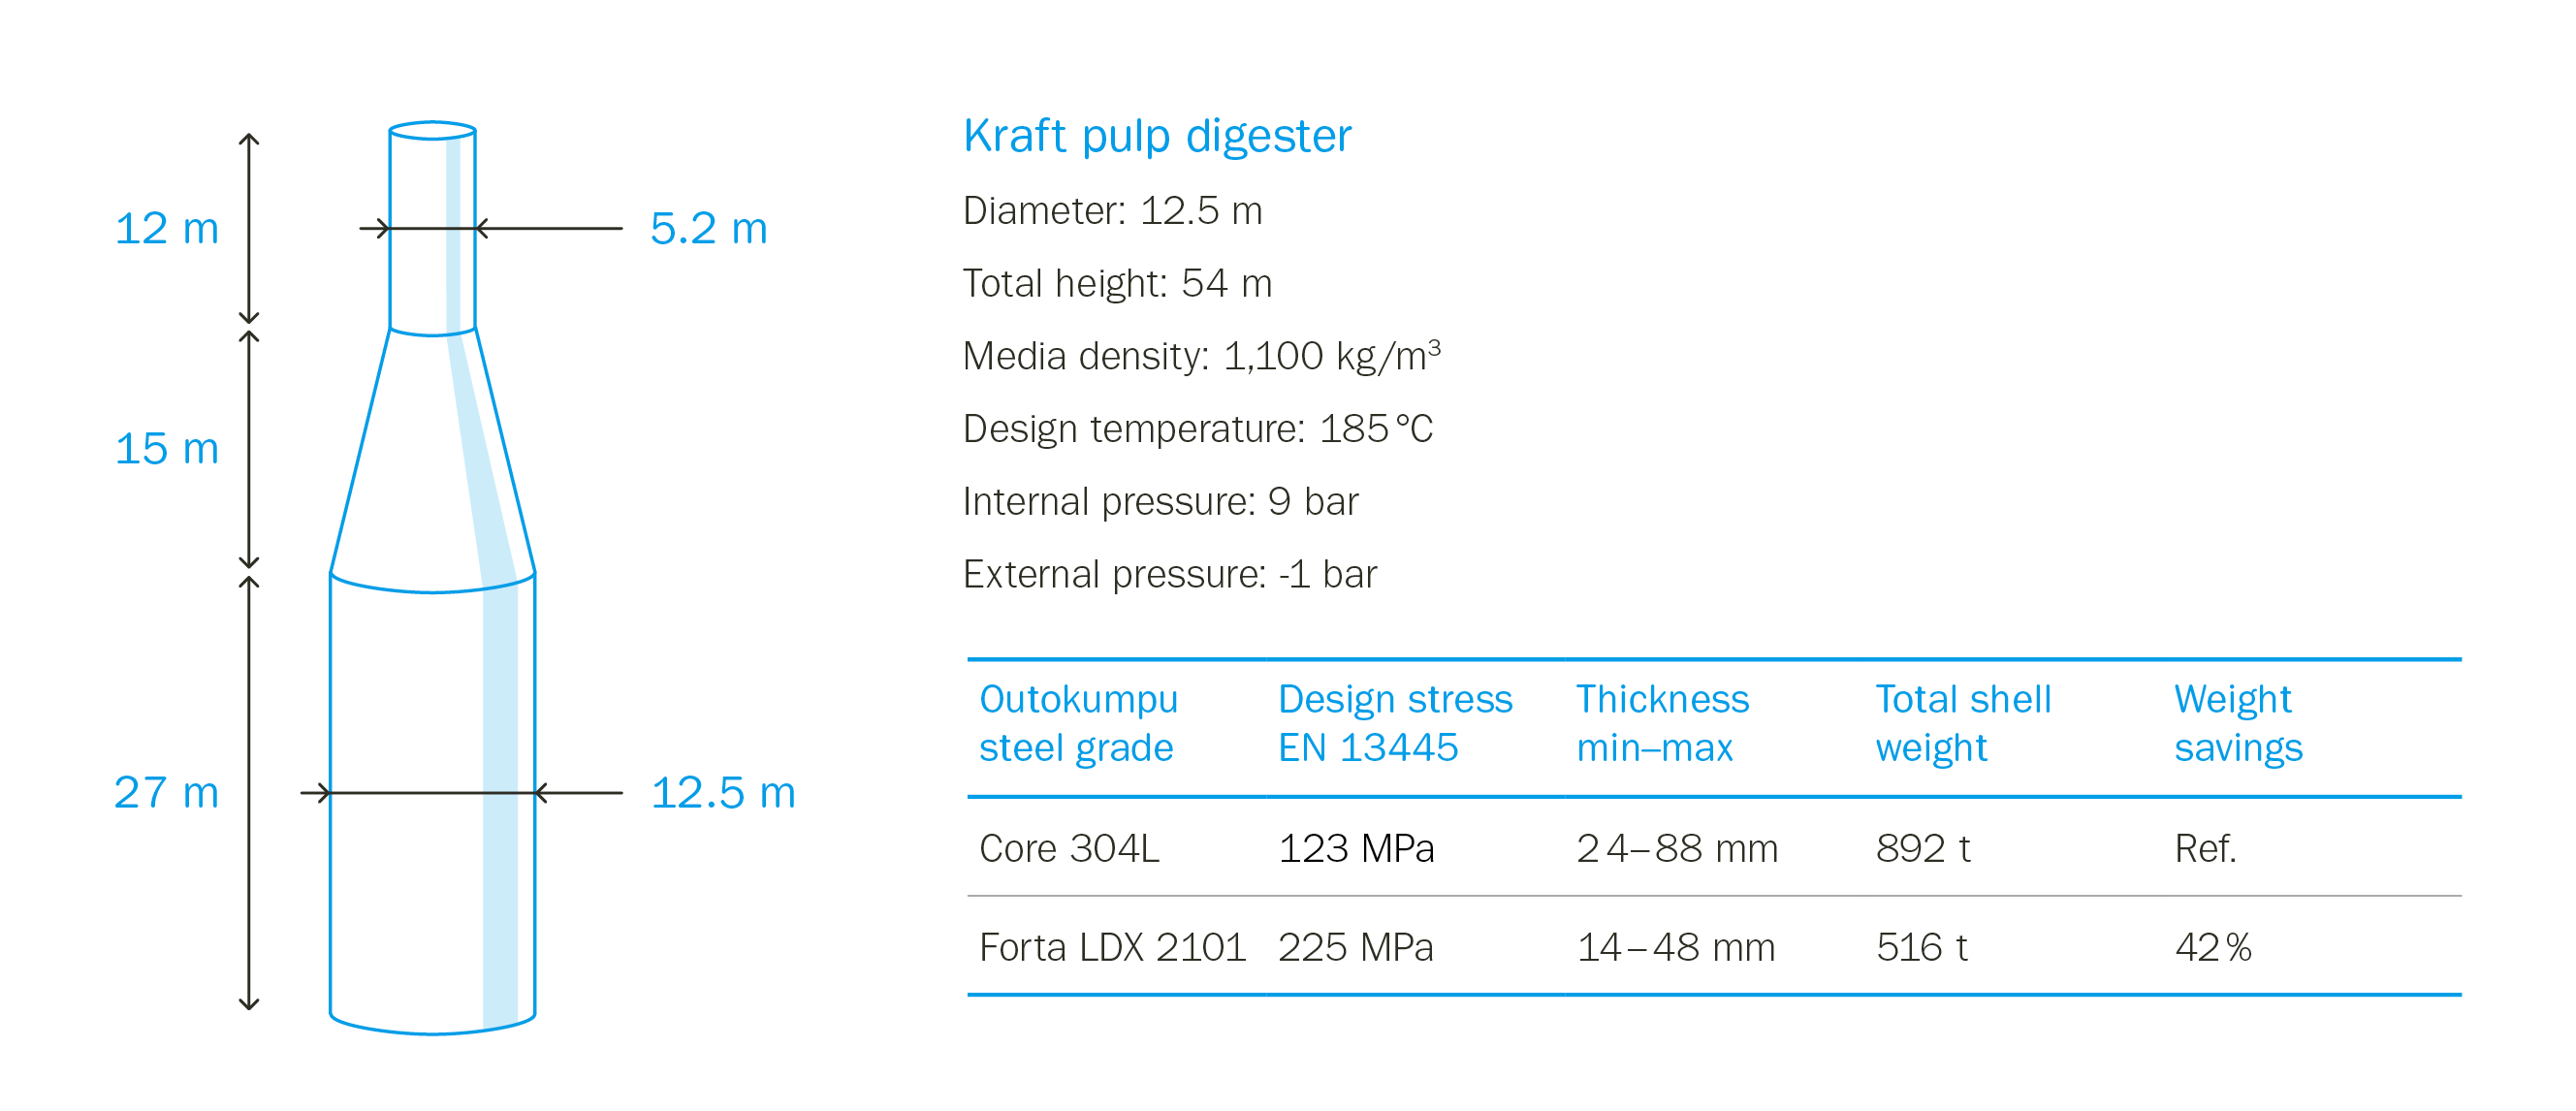 Material weight saving potential for a pressure vessel designed according to EN 13445 using standard austenitic and lean duplex stainless steel grades.